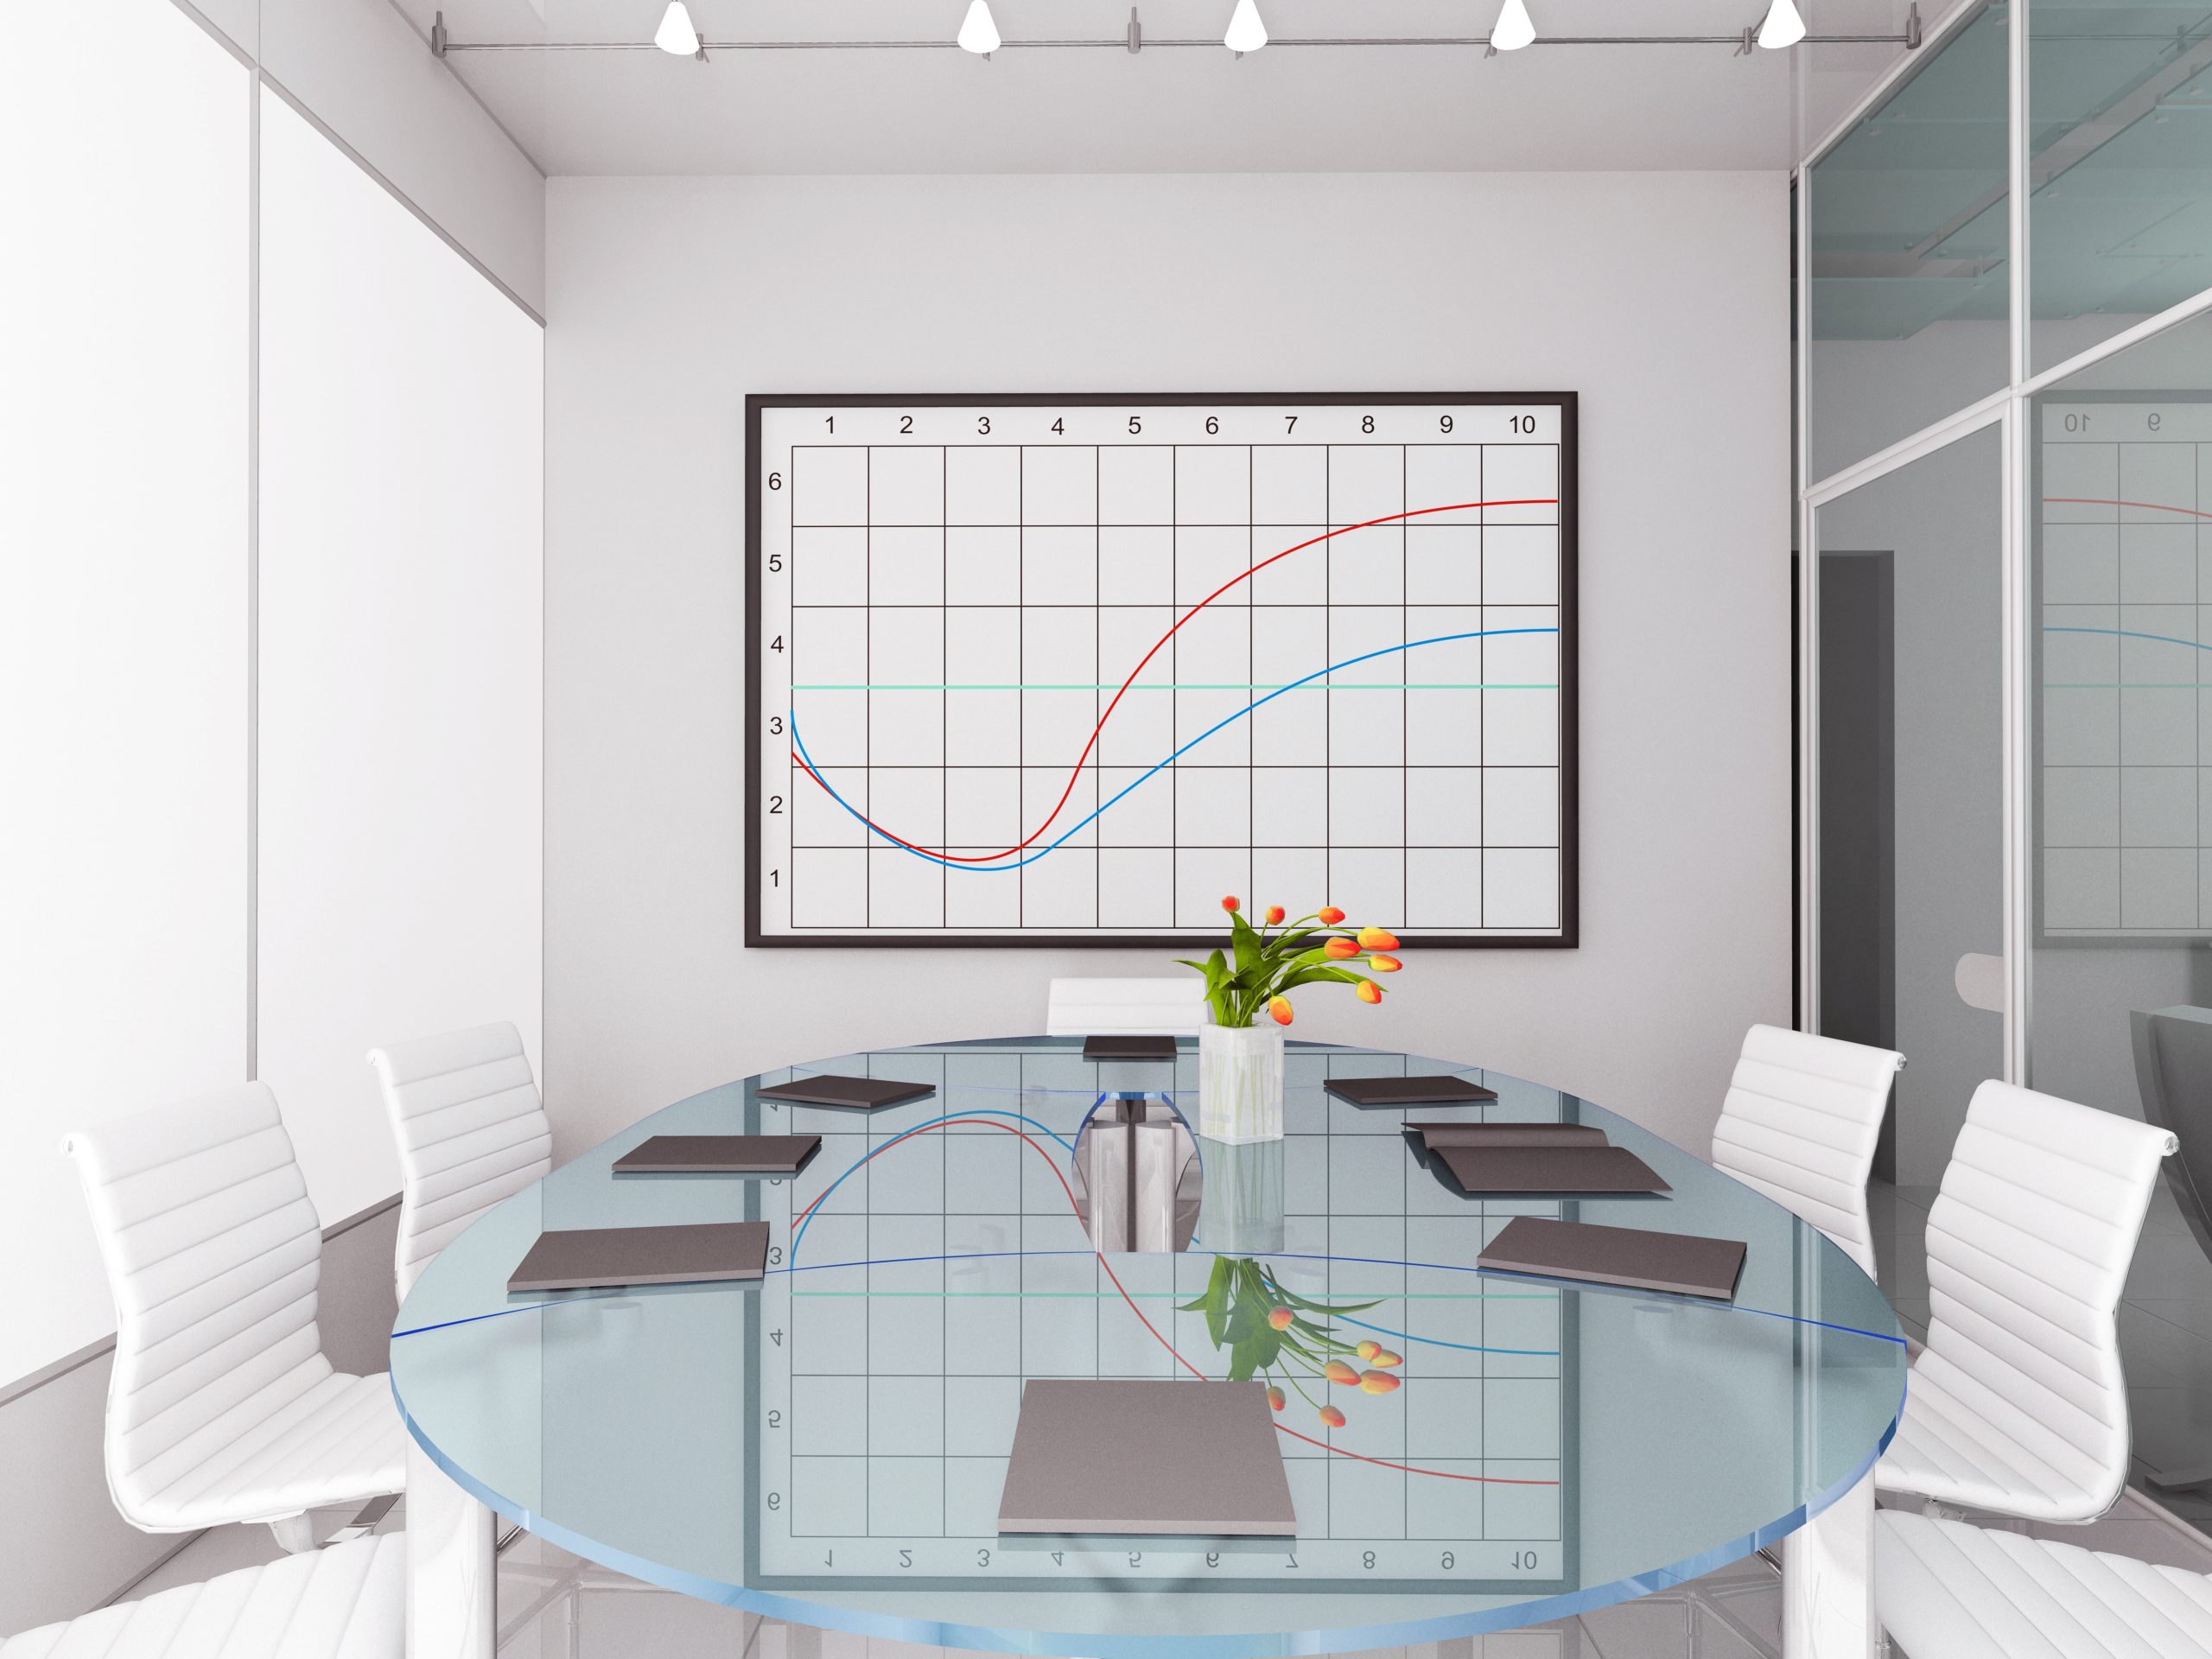 Picture of a modern, white conference room with a graph on the monitor